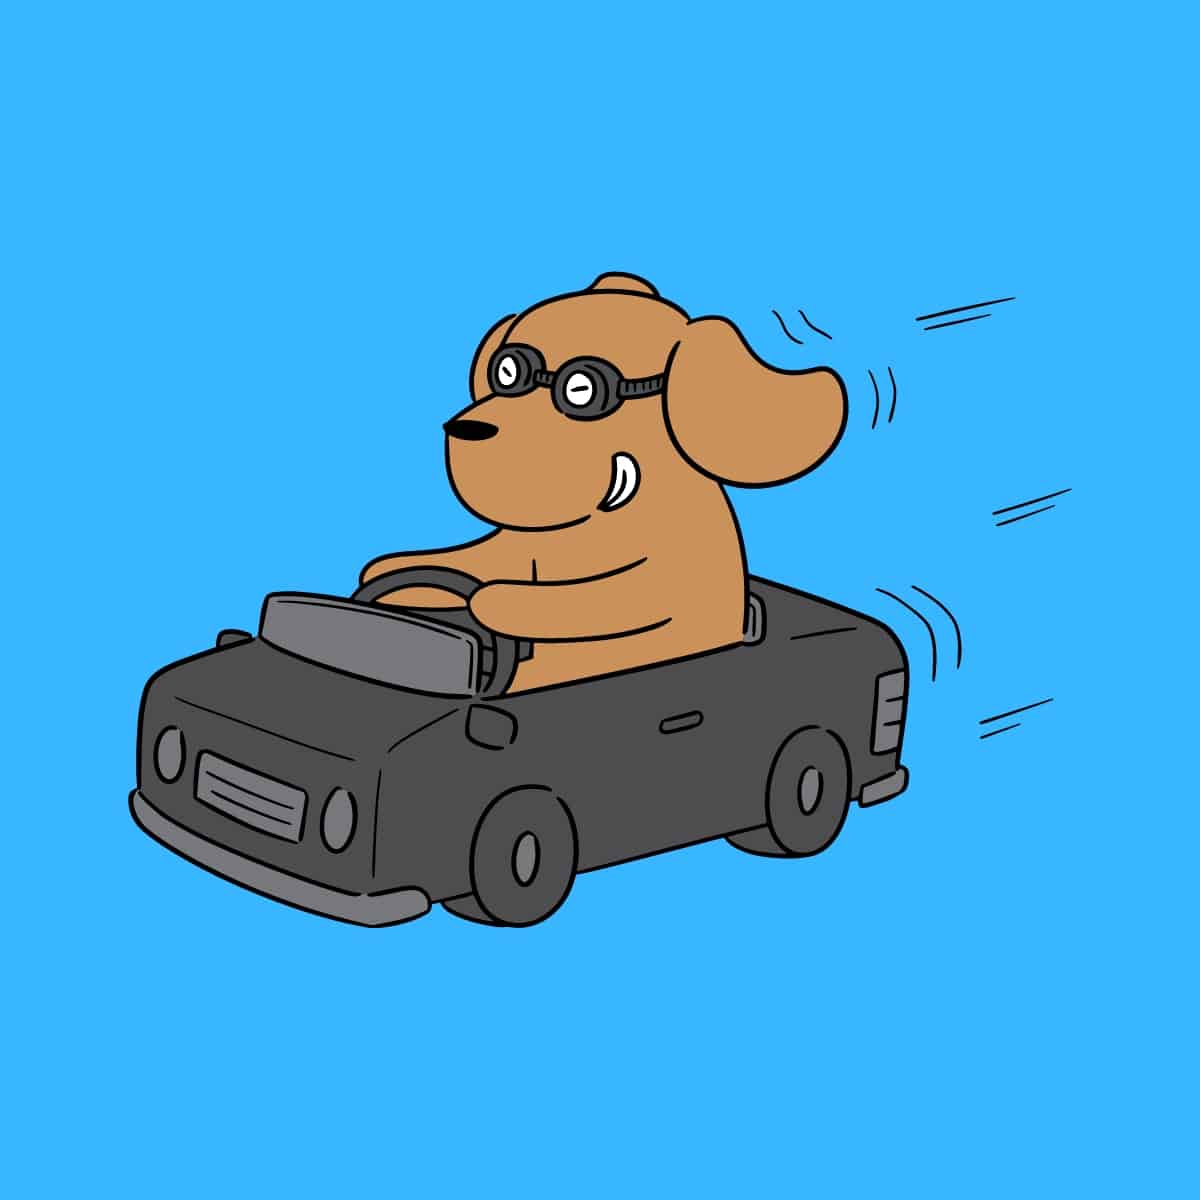 Cartoon graphic of a brown dog driving face while wearing goggles on a blue background.